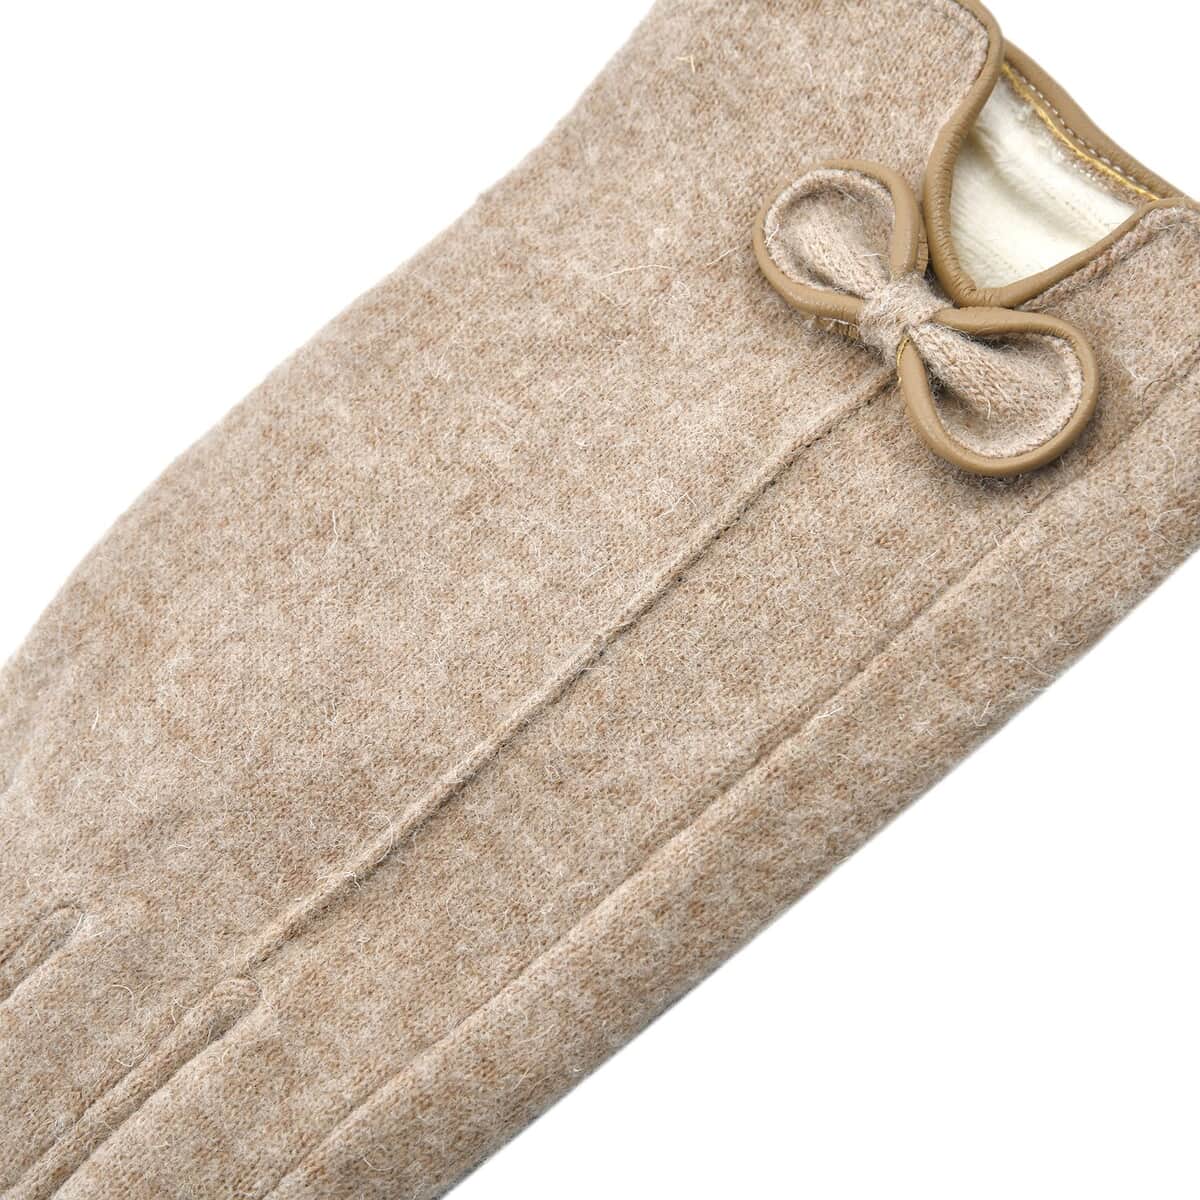 Beige Cashmere Warm Gloves with Bowknot and Equipped Touch Screen Friendly (9.2"x3.54") image number 5